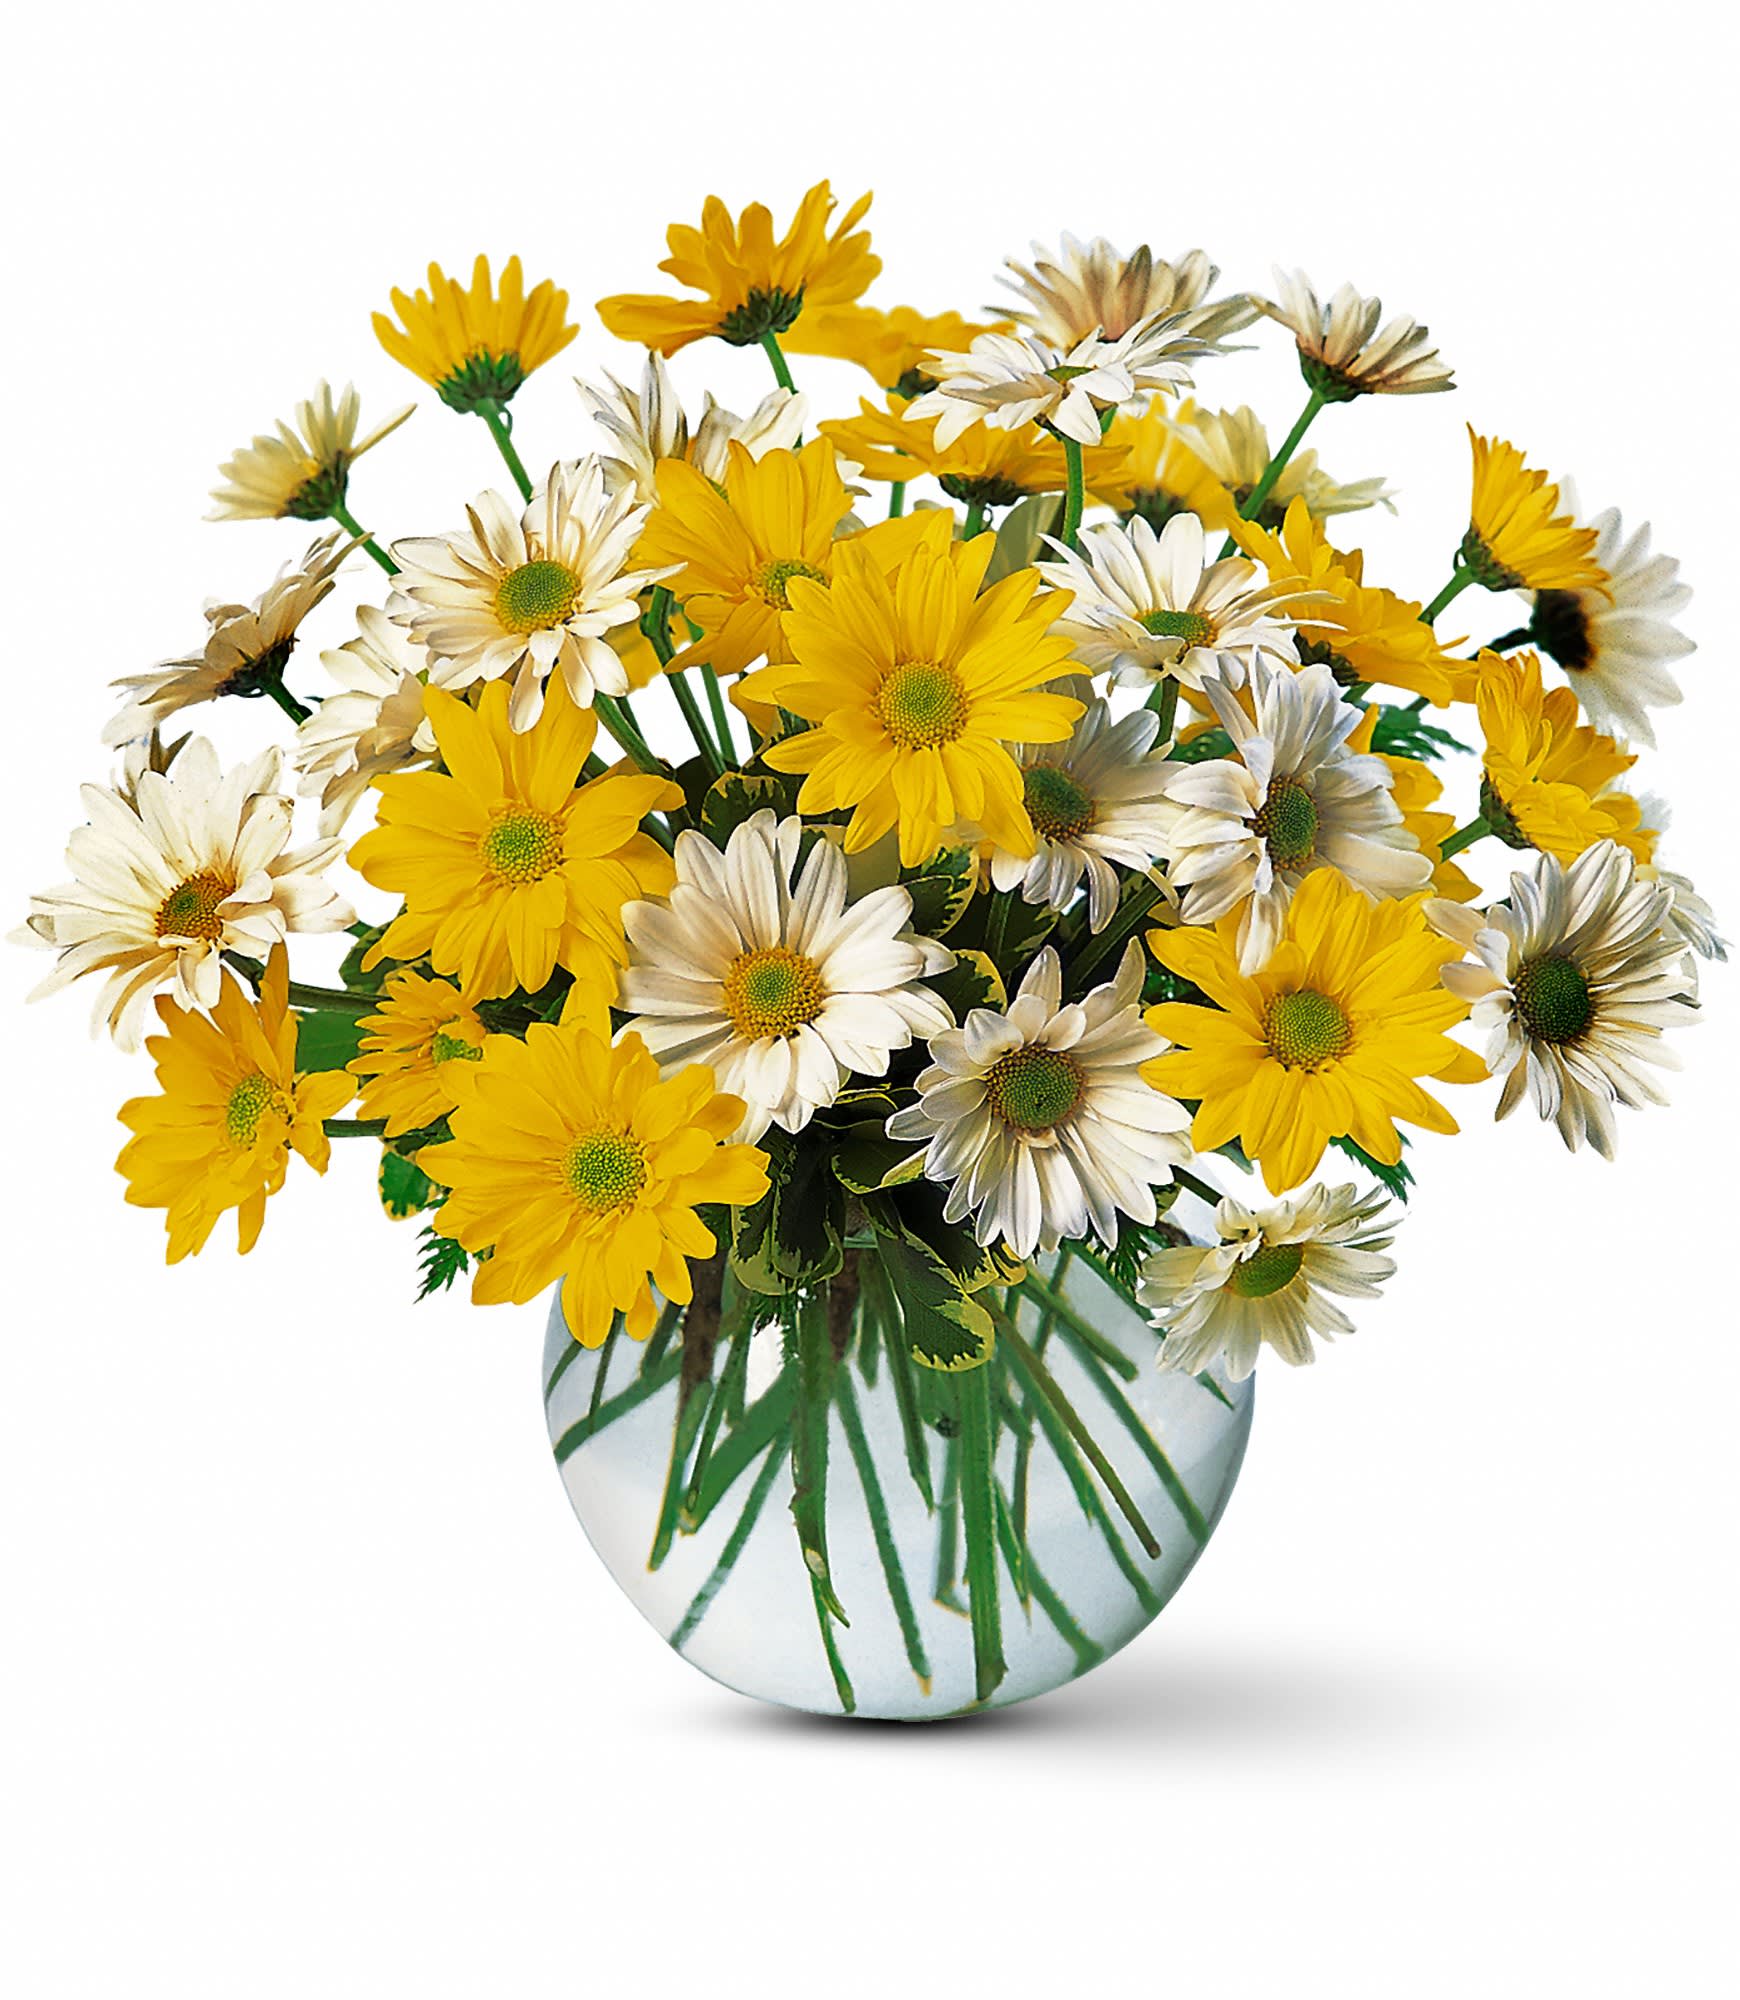 Dashing Daisies A020 - Send these bright and joyful daisies and that special someone's heart will skip a beat or two.